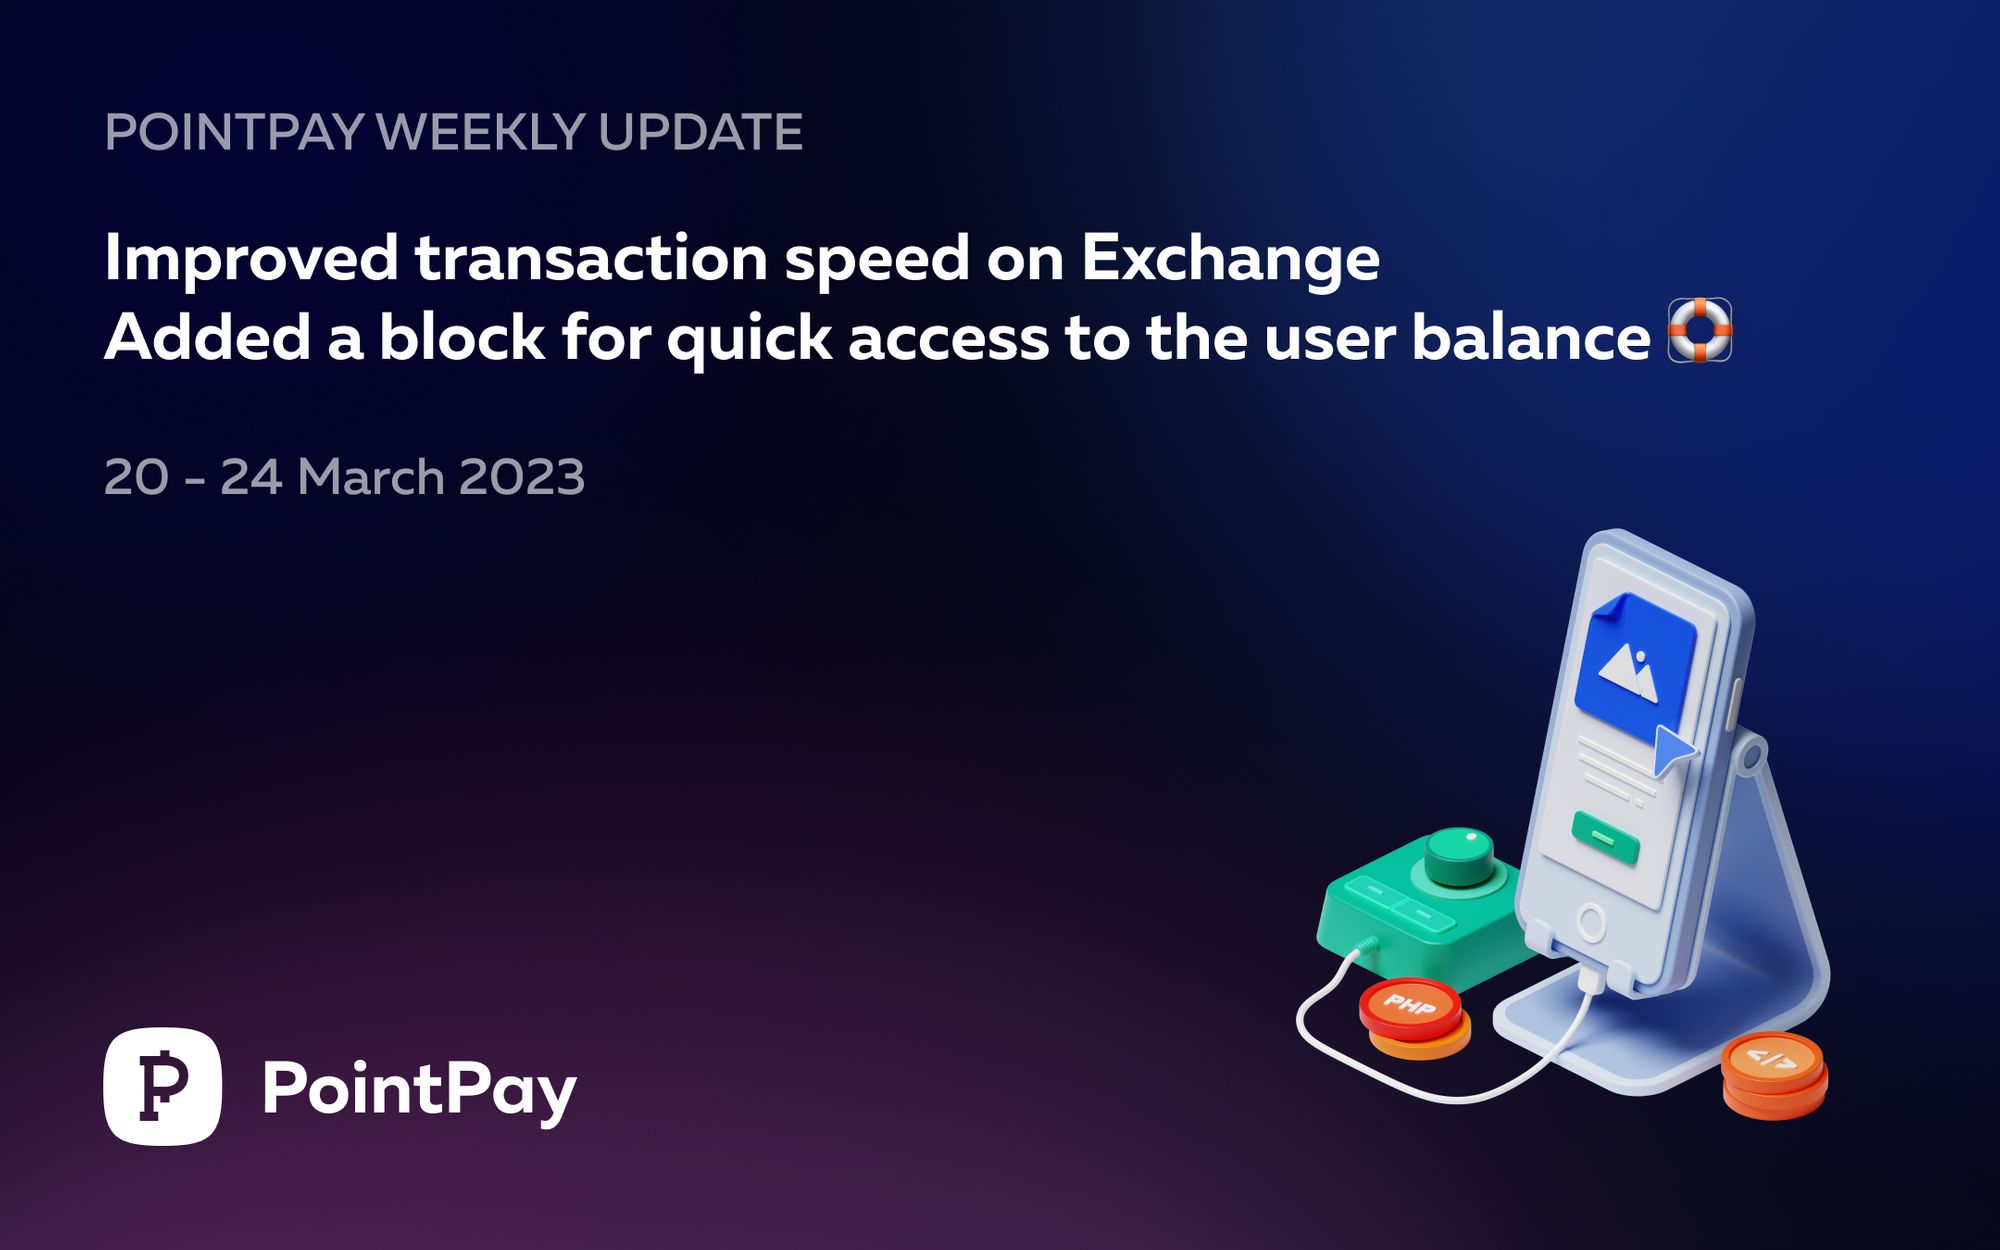 PointPay Weekly Update (20 - 24 March 2023)